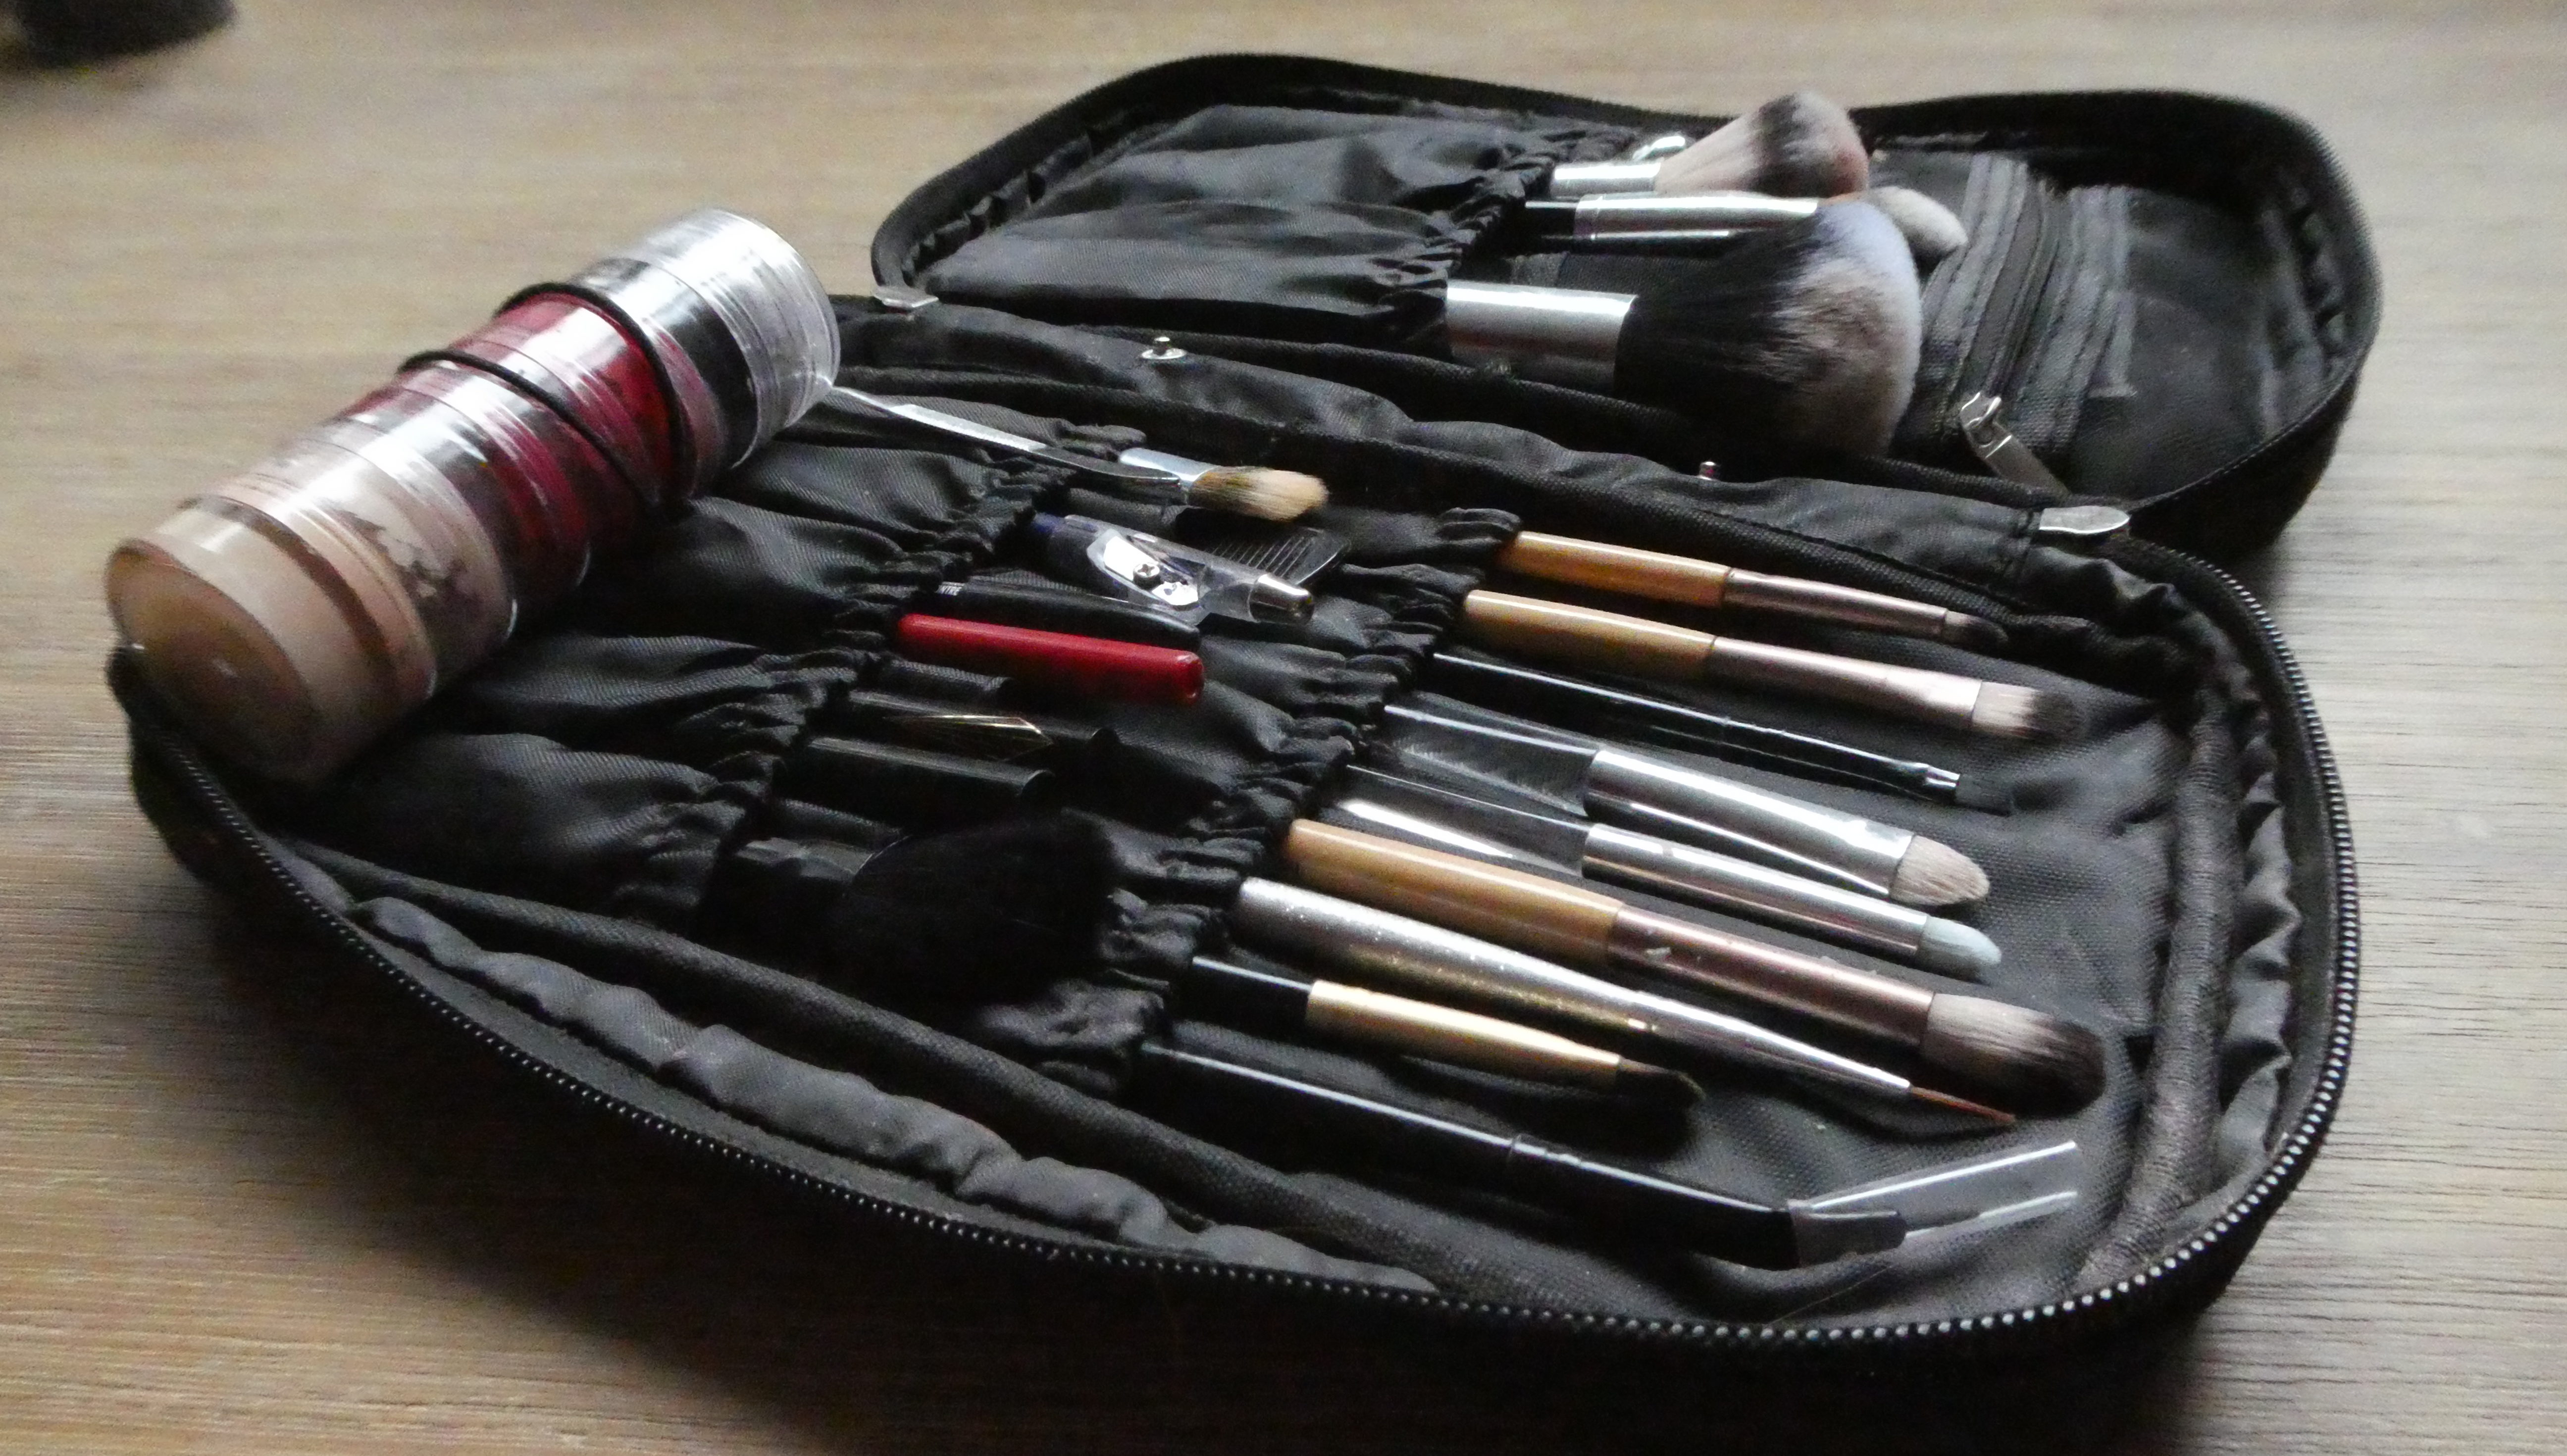 The Minimalist Makeup Kit of a Professional Entertainer